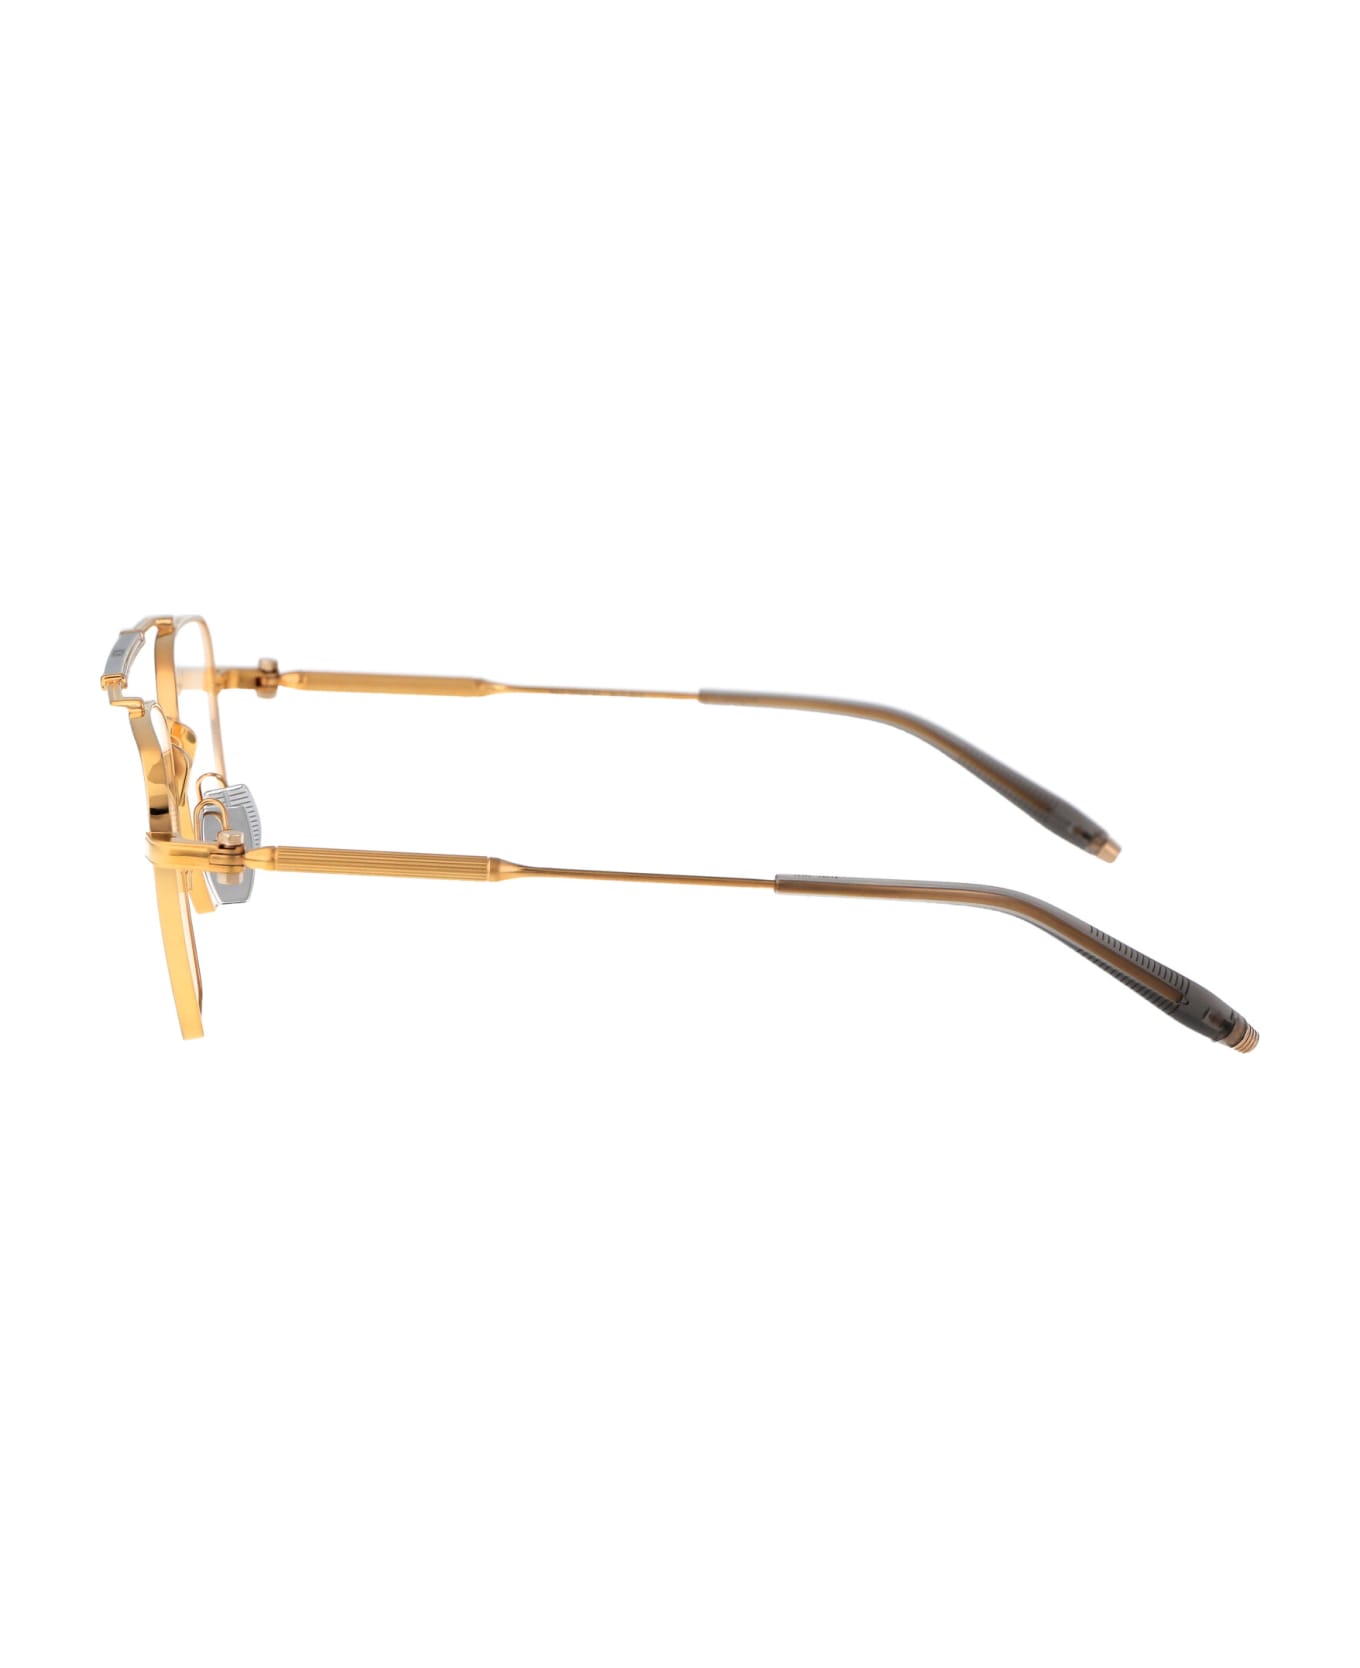 Akoni Europa Glasses - Brushed gold and Silver- Grey Crystal